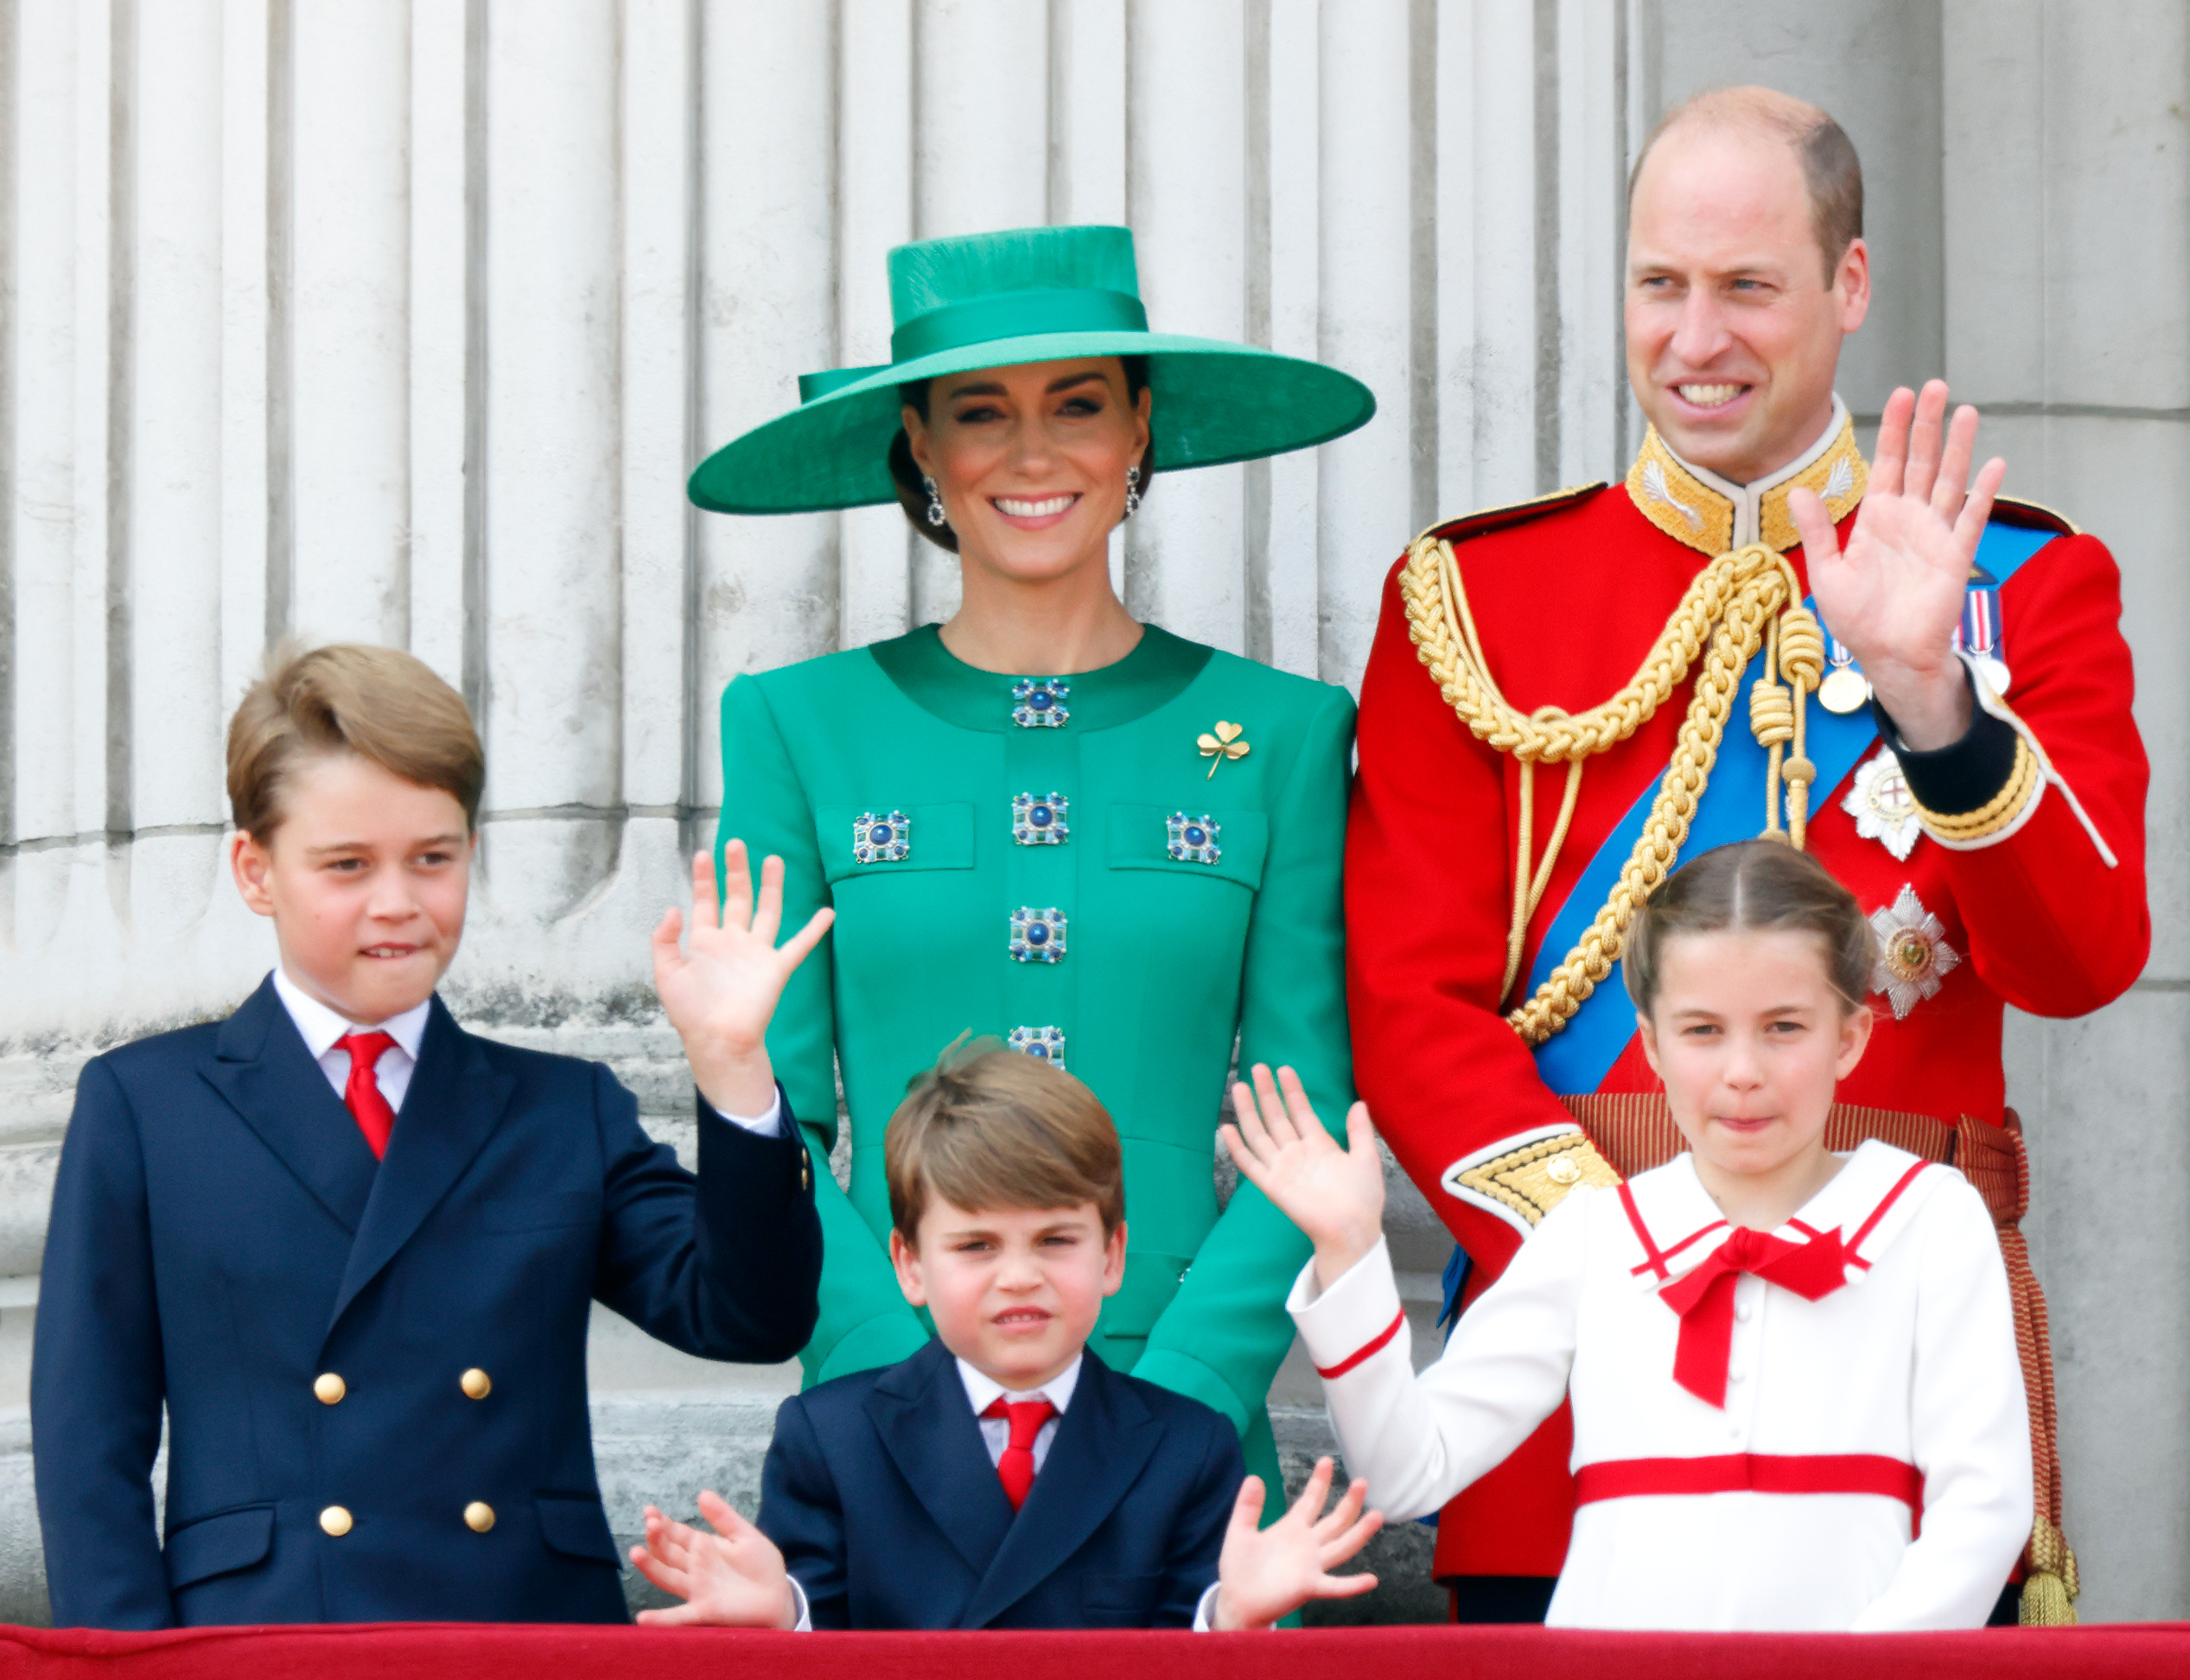 Princess Catherine and Prince William with their children George, Louis and Charlotte at the balcony of Buckingham Palace during Trooping the Colour on June 17, 2023 in London, England | Source: Getty Images